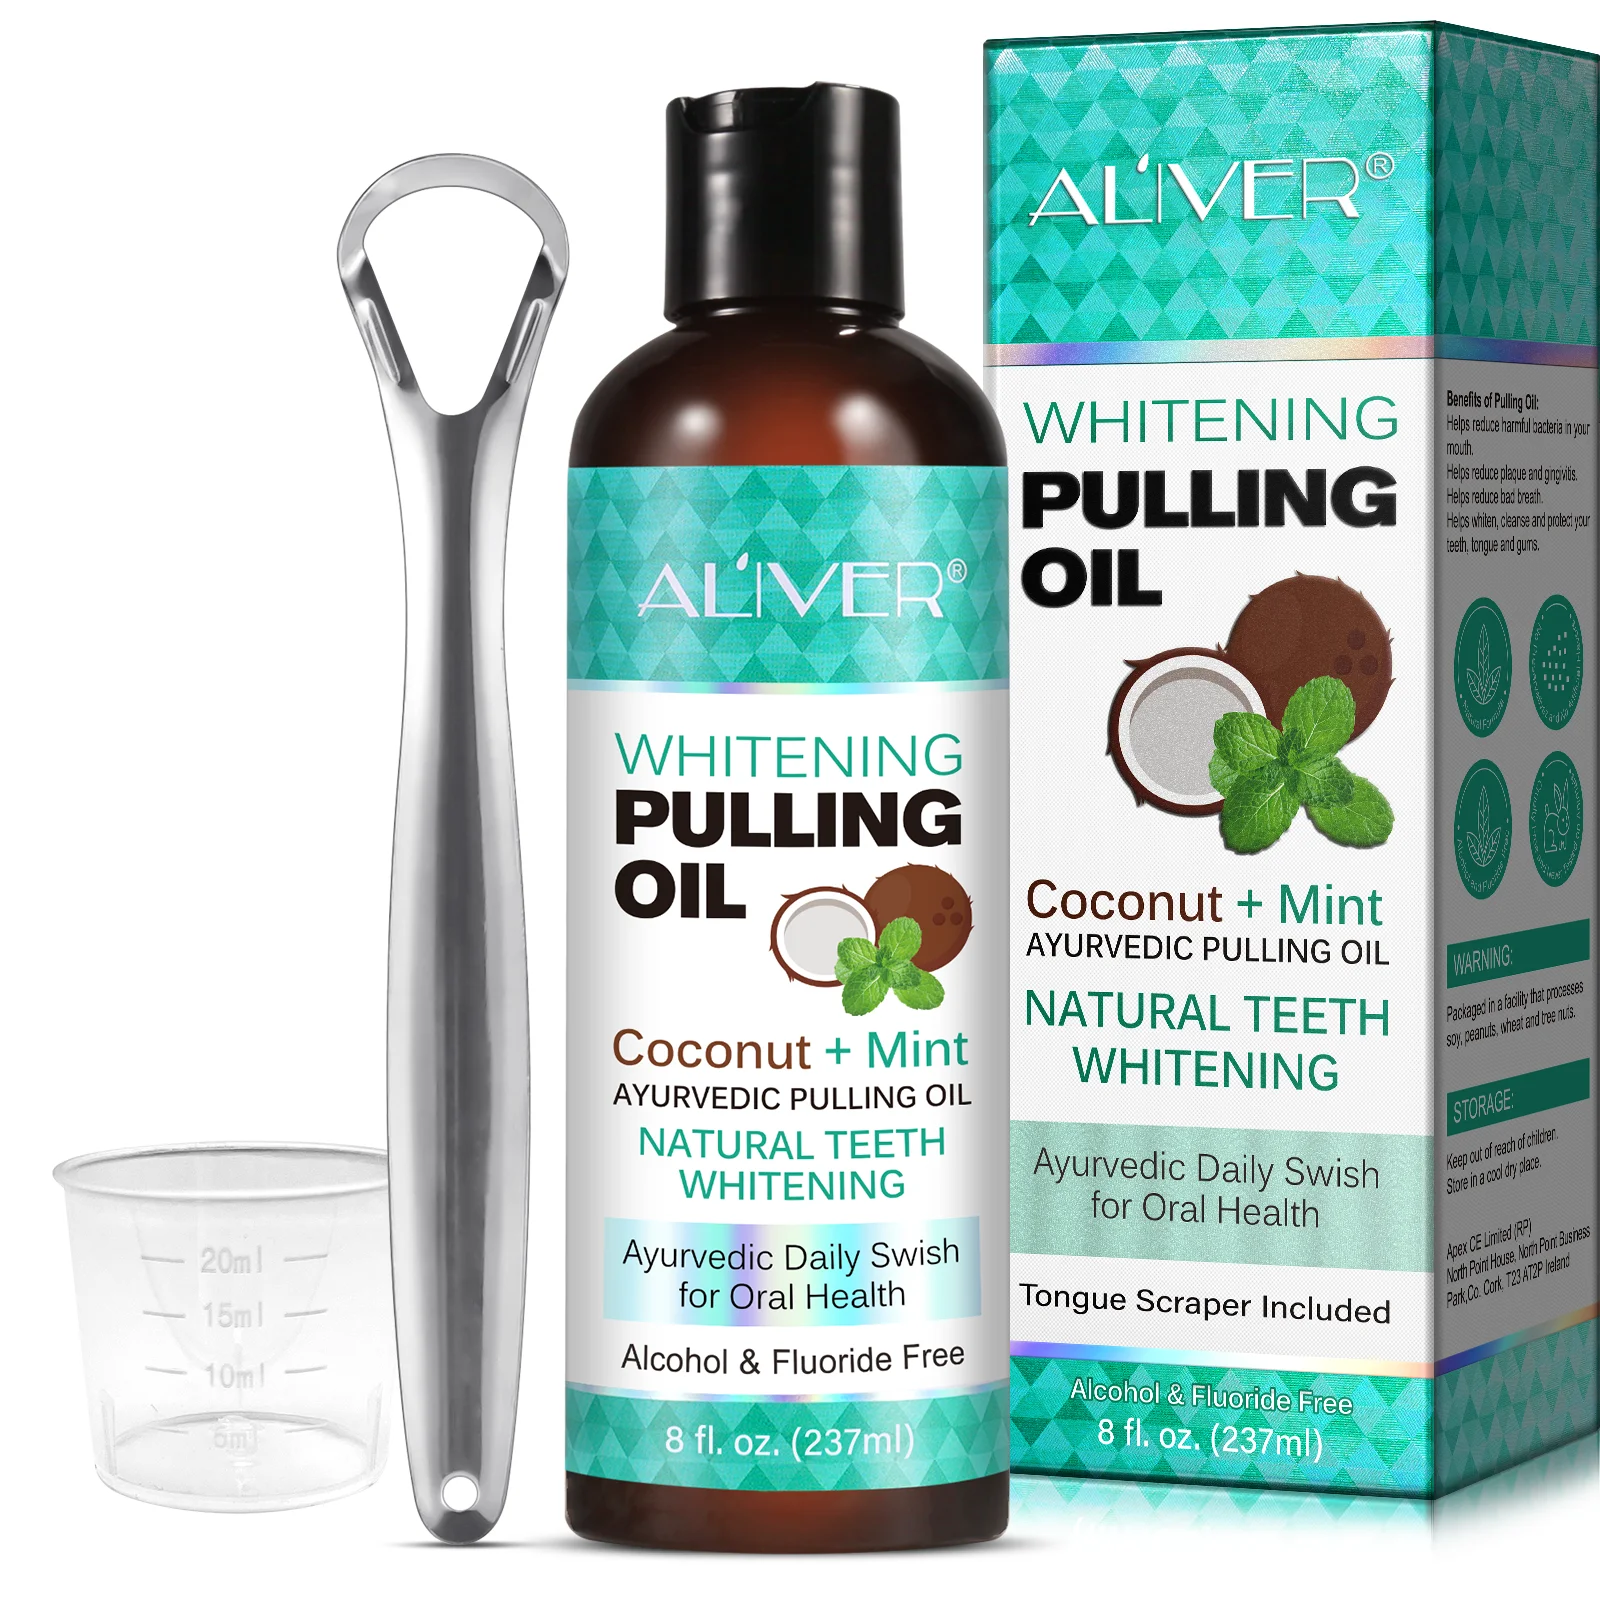 

Private Label Natural Teeth Whitening Mouthwash Coconut Mint Oil Pulling For Teeth With Tongue Scraper Inside The Box